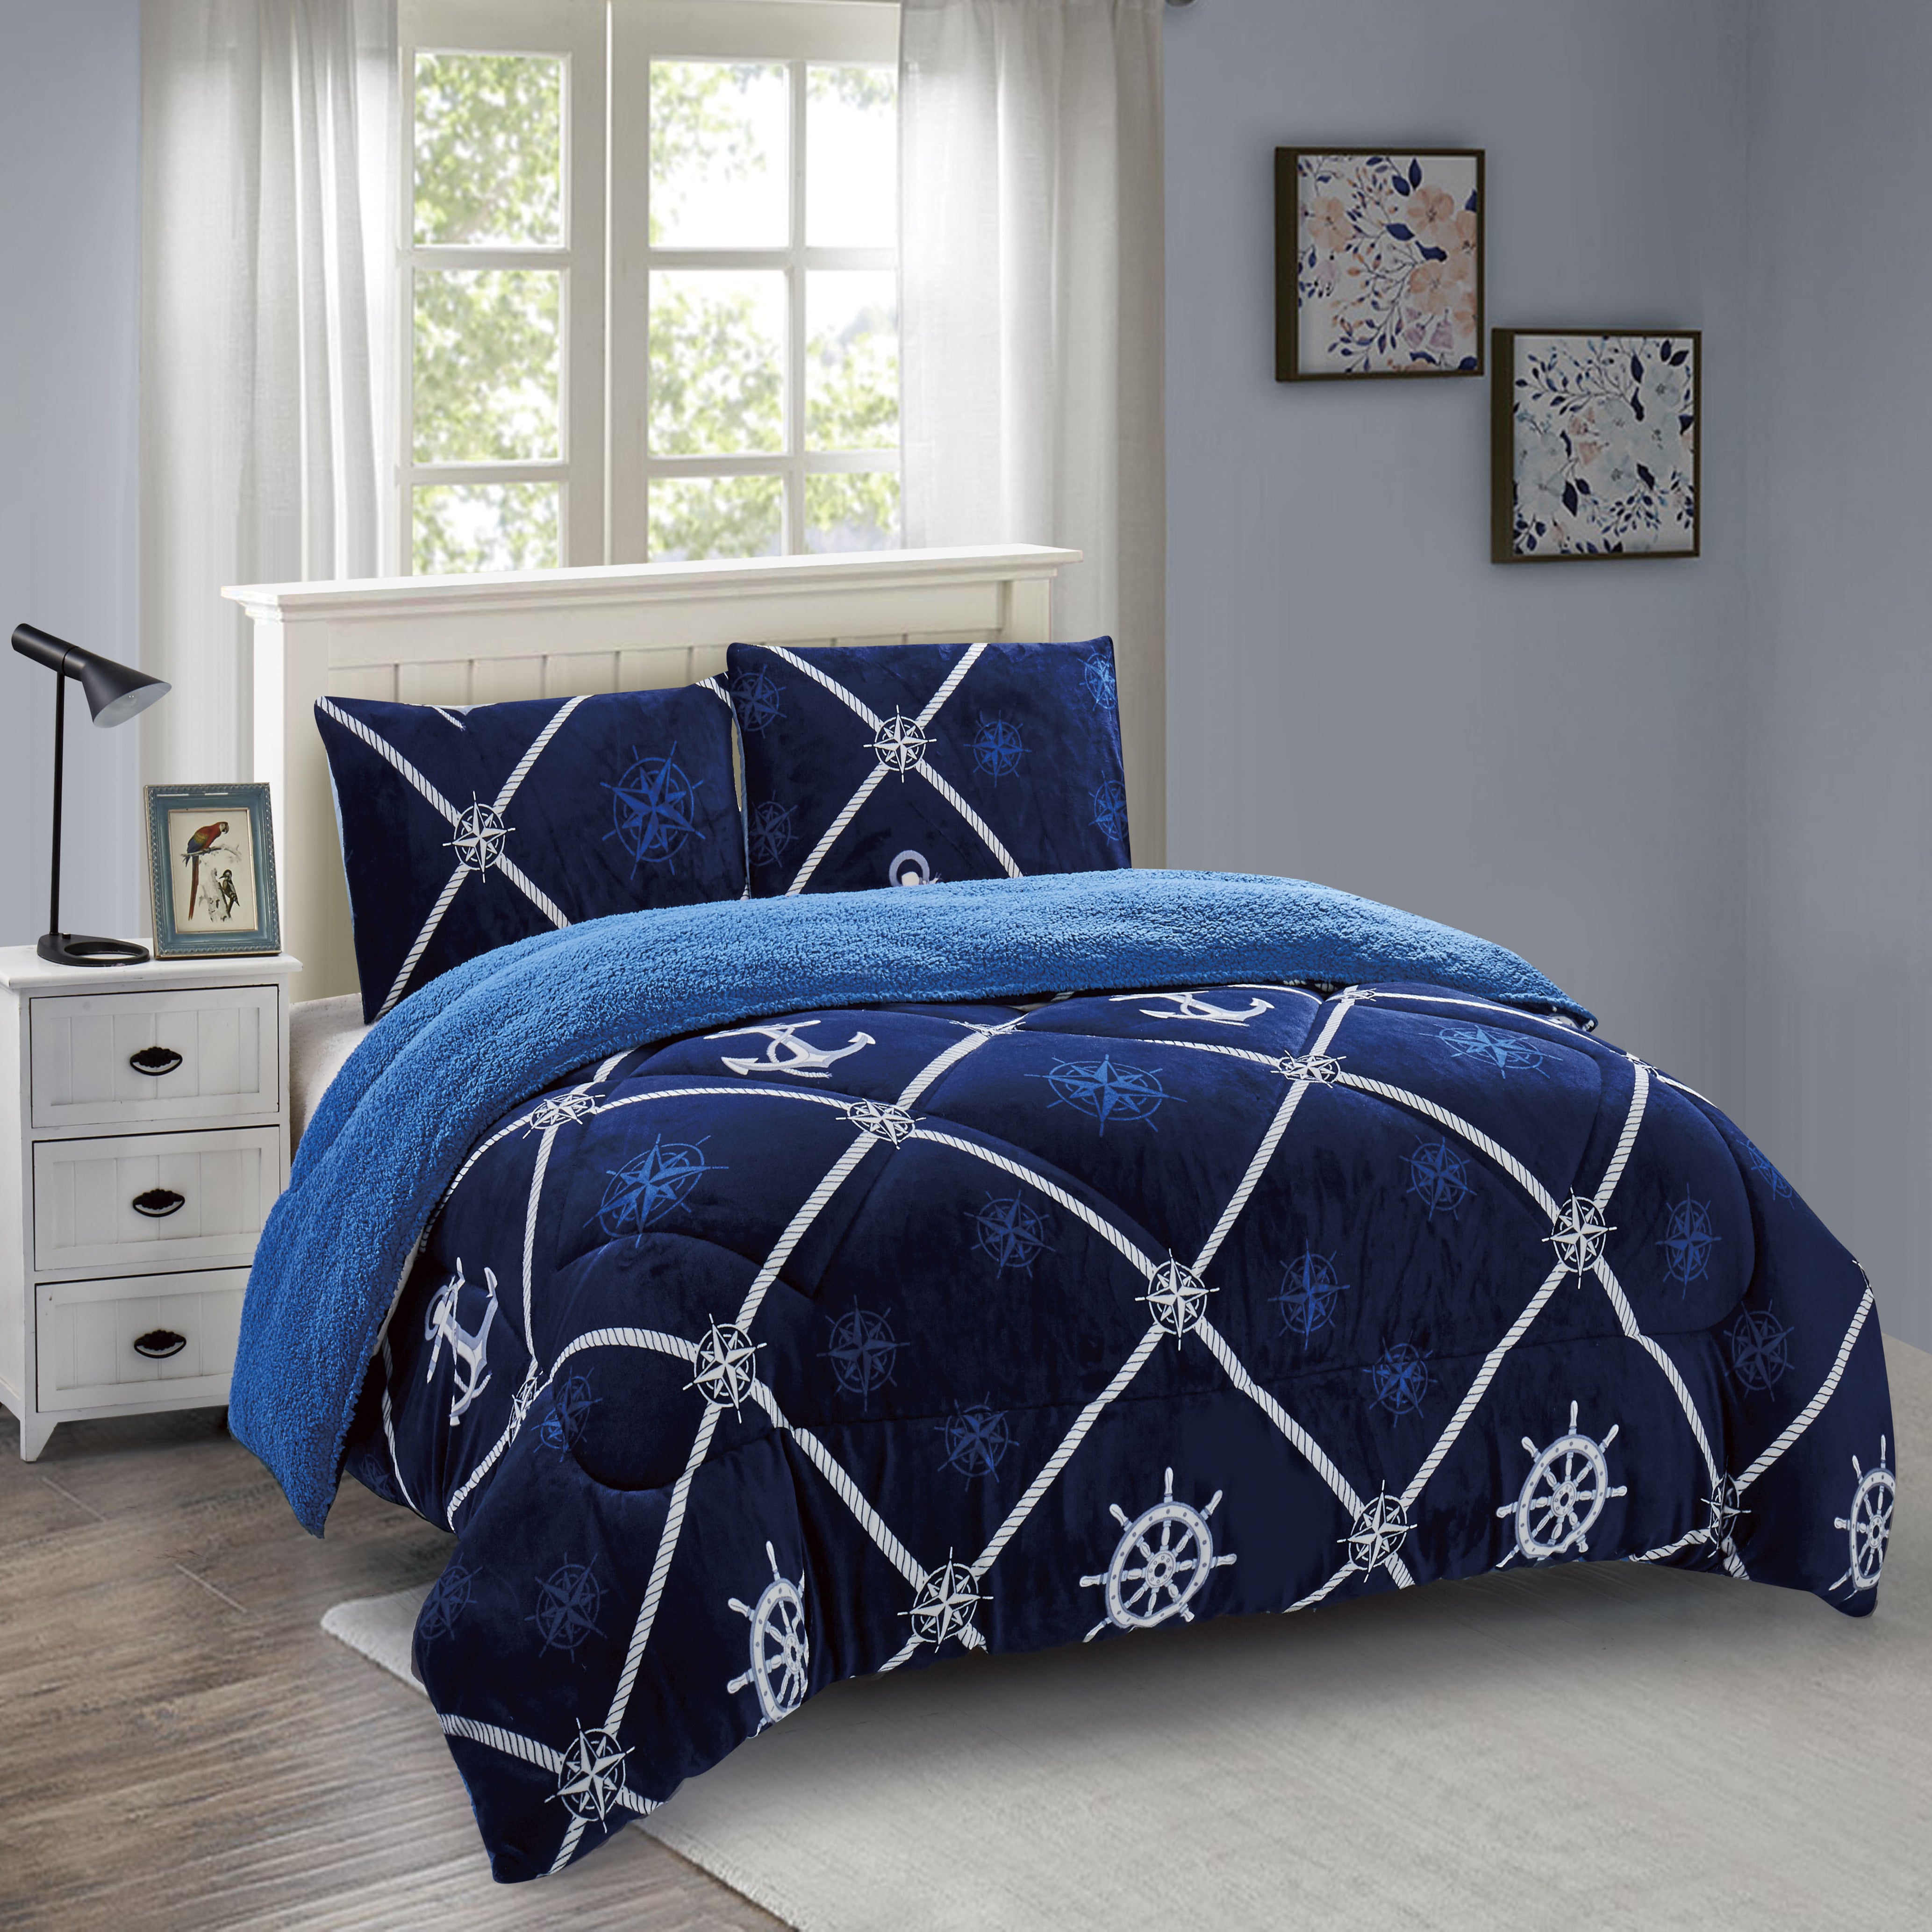 OSAKA 3PC NAVY FLEECE BORREGO BLANKET DOUBLE PLY BLANKET - SUPER SOFT WARM - THICK AND HEAVY PLUSH BLANKET - WITH 2 PILLOW SHAM